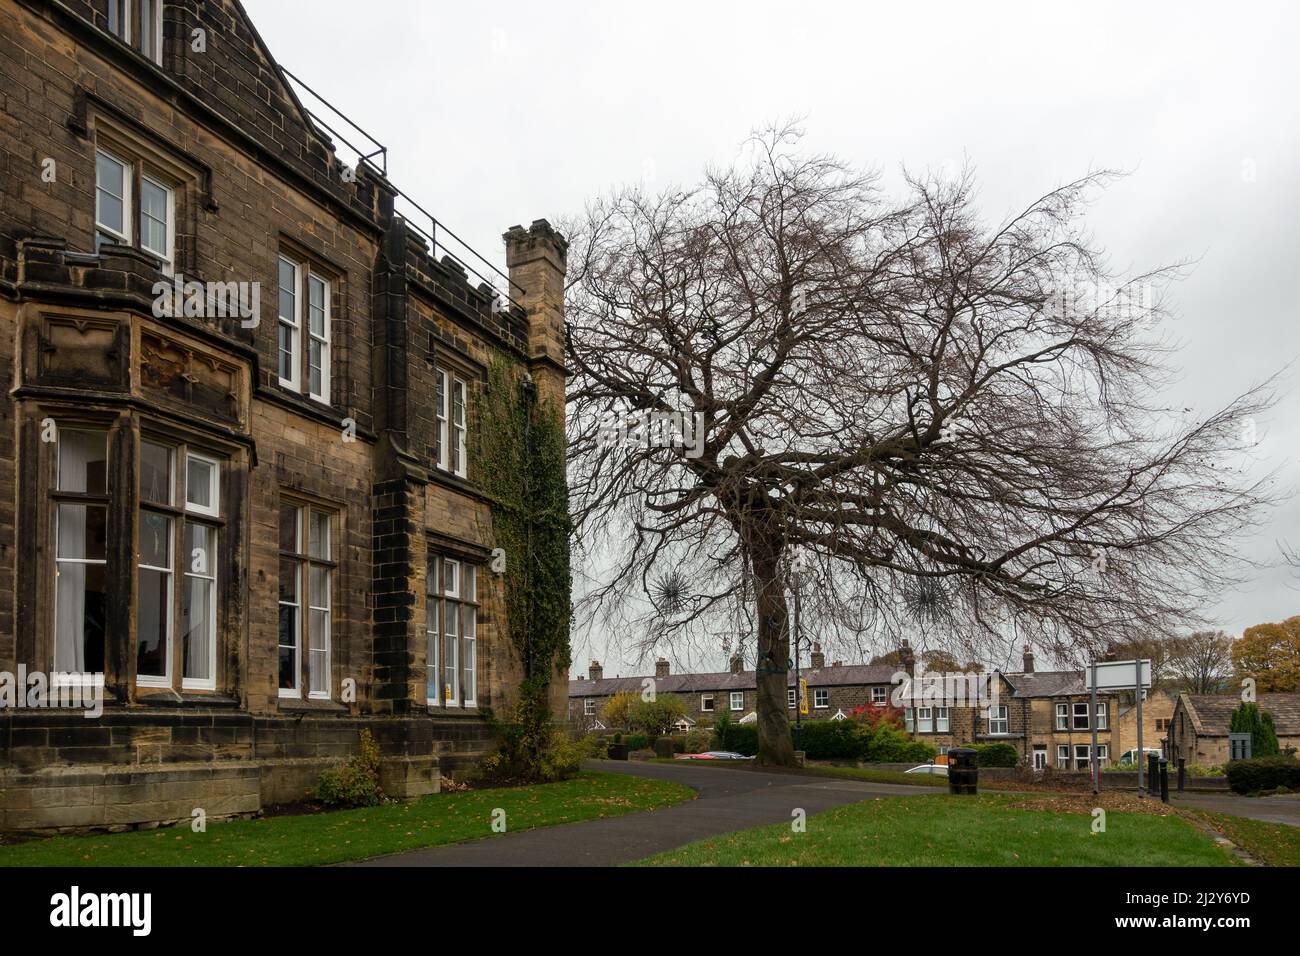 Burley-in-Wharfedale village centre with old Yorkshire stone building, The Grange,  and a mature tree. West Yorkshire, UK Stock Photo